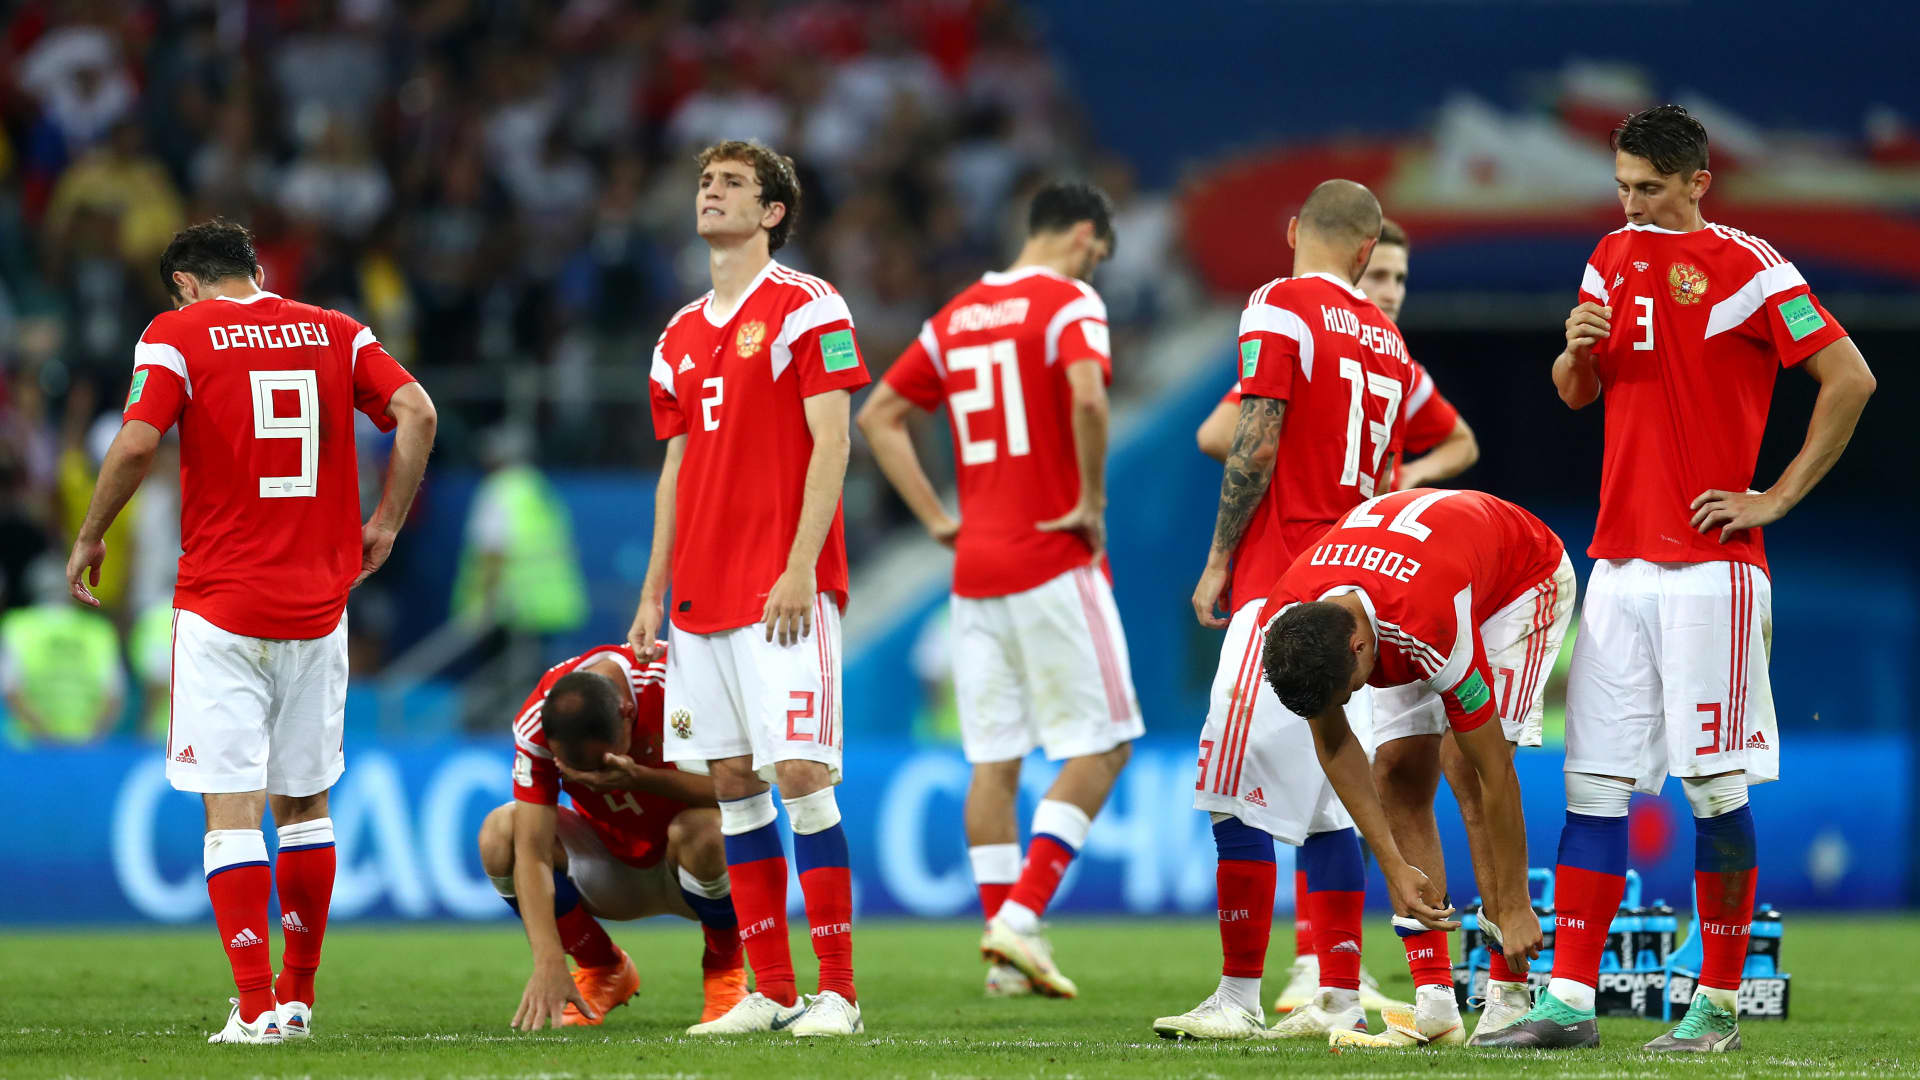 Players of Russia show their dejection following the defeat in the 2018 FIFA World Cup Russia Quarter Final match between Russia and Croatia at Fisht Stadium on July 7, 2018 in Sochi, Russia.